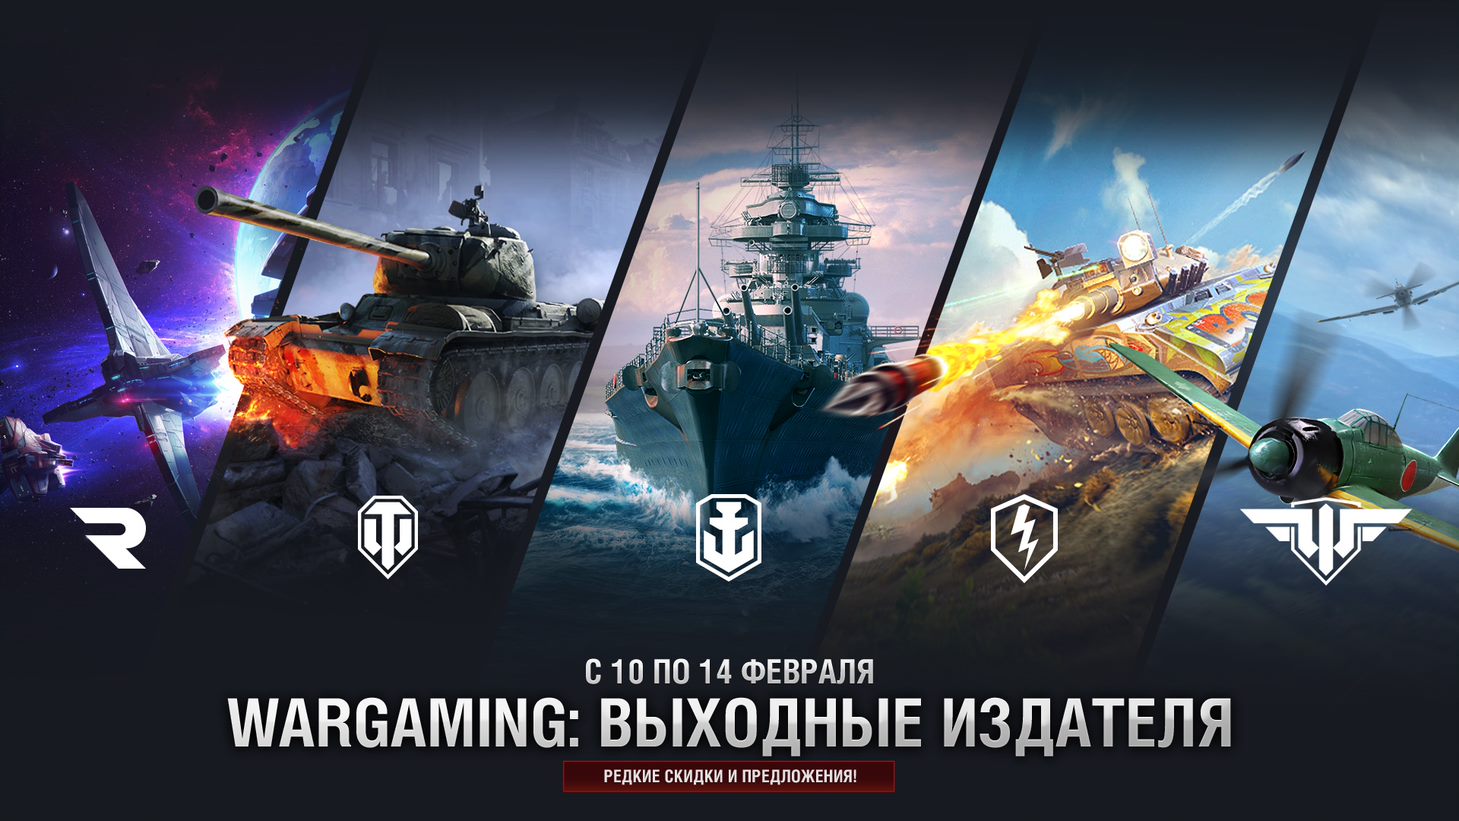 Find discounts up to 95% for the first time on Steam for Wargaming: Publisher Weekend